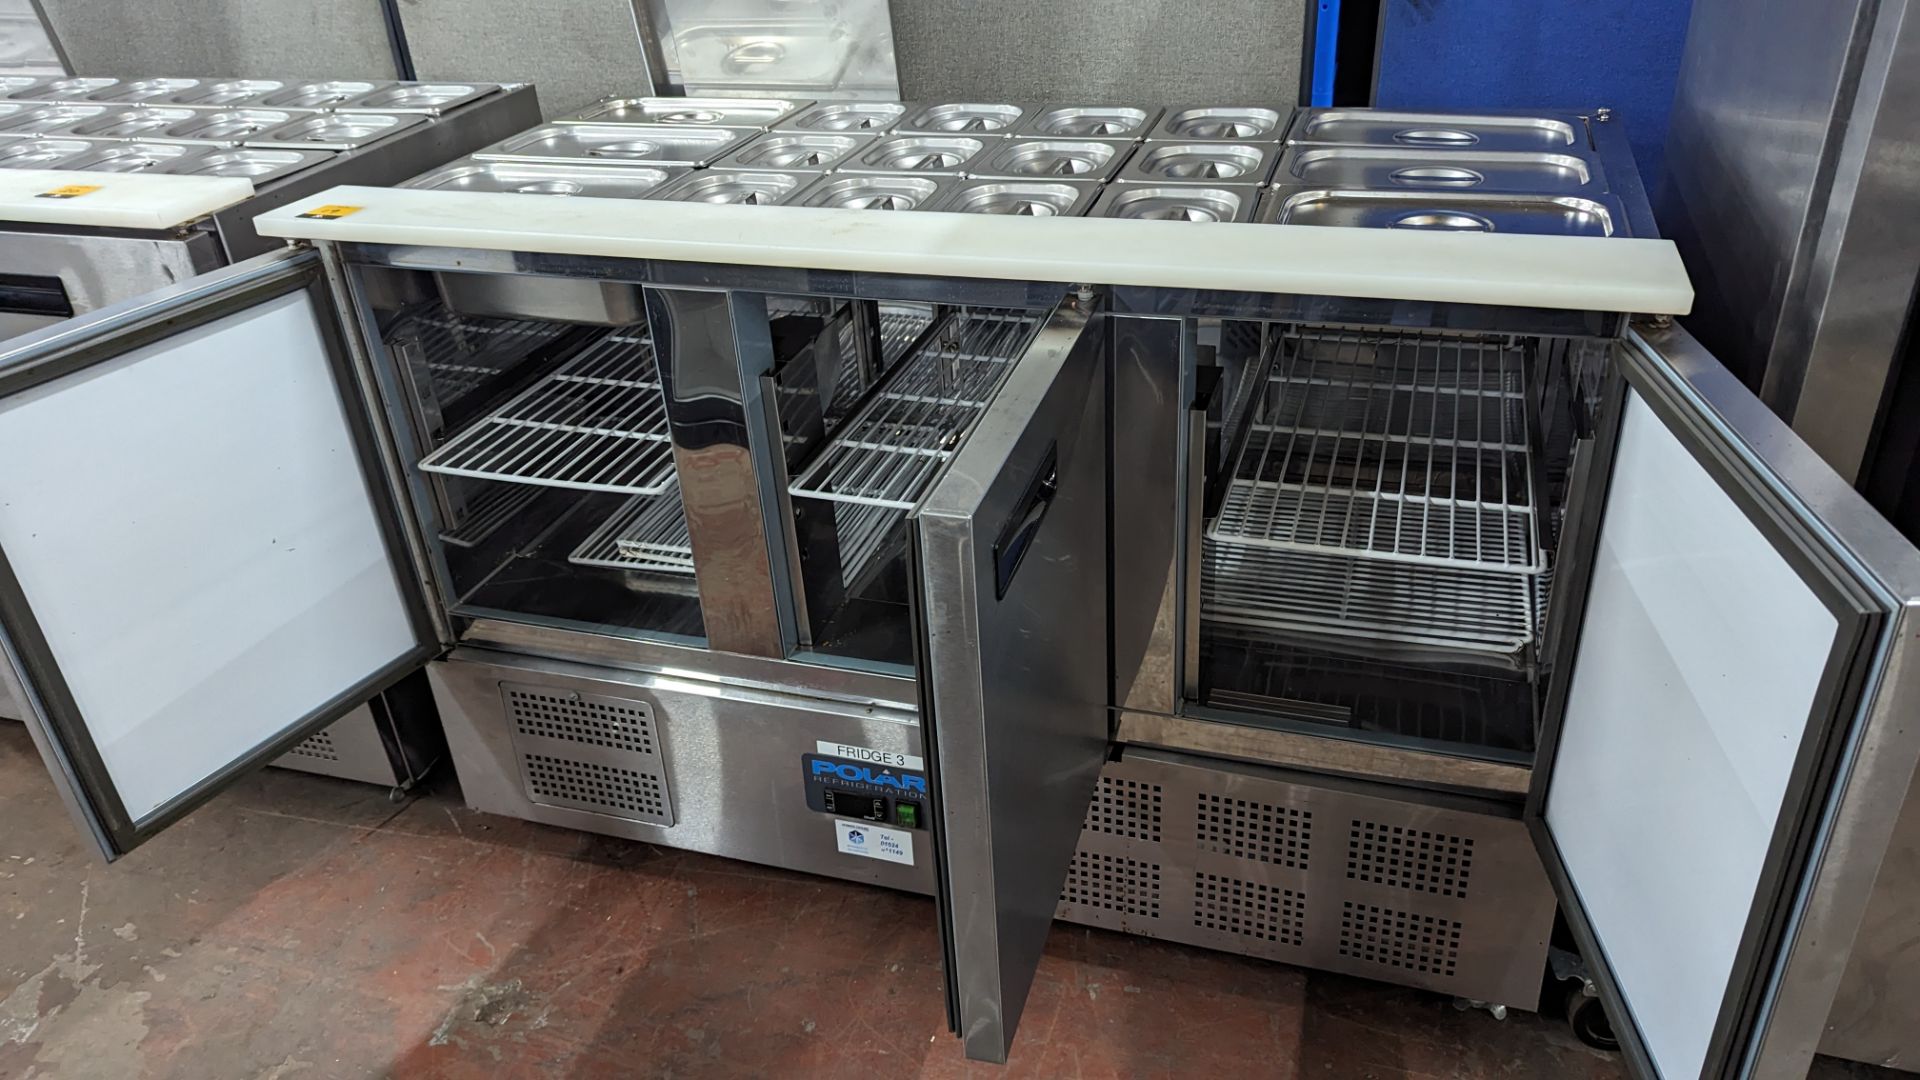 Polar stainless steel triple door refrigerated cabinet with large saladette unit built into the top, - Image 9 of 9